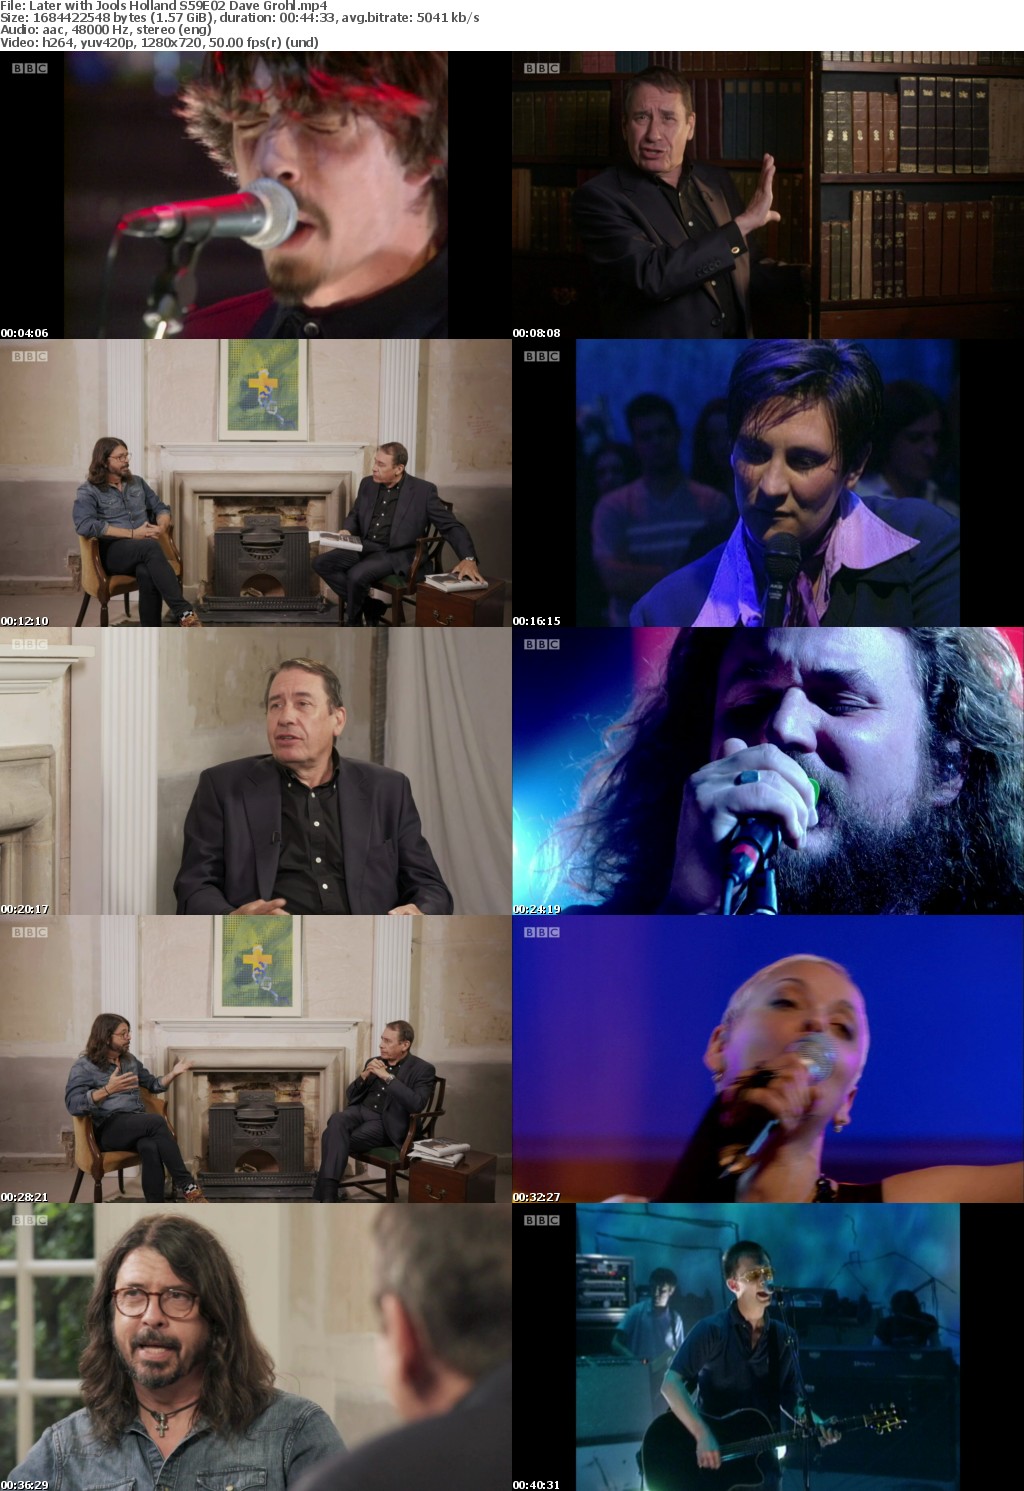 Later with Jools Holland S59E02 Dave Grohl (1280x720p HD, 50fps, soft Eng subs)